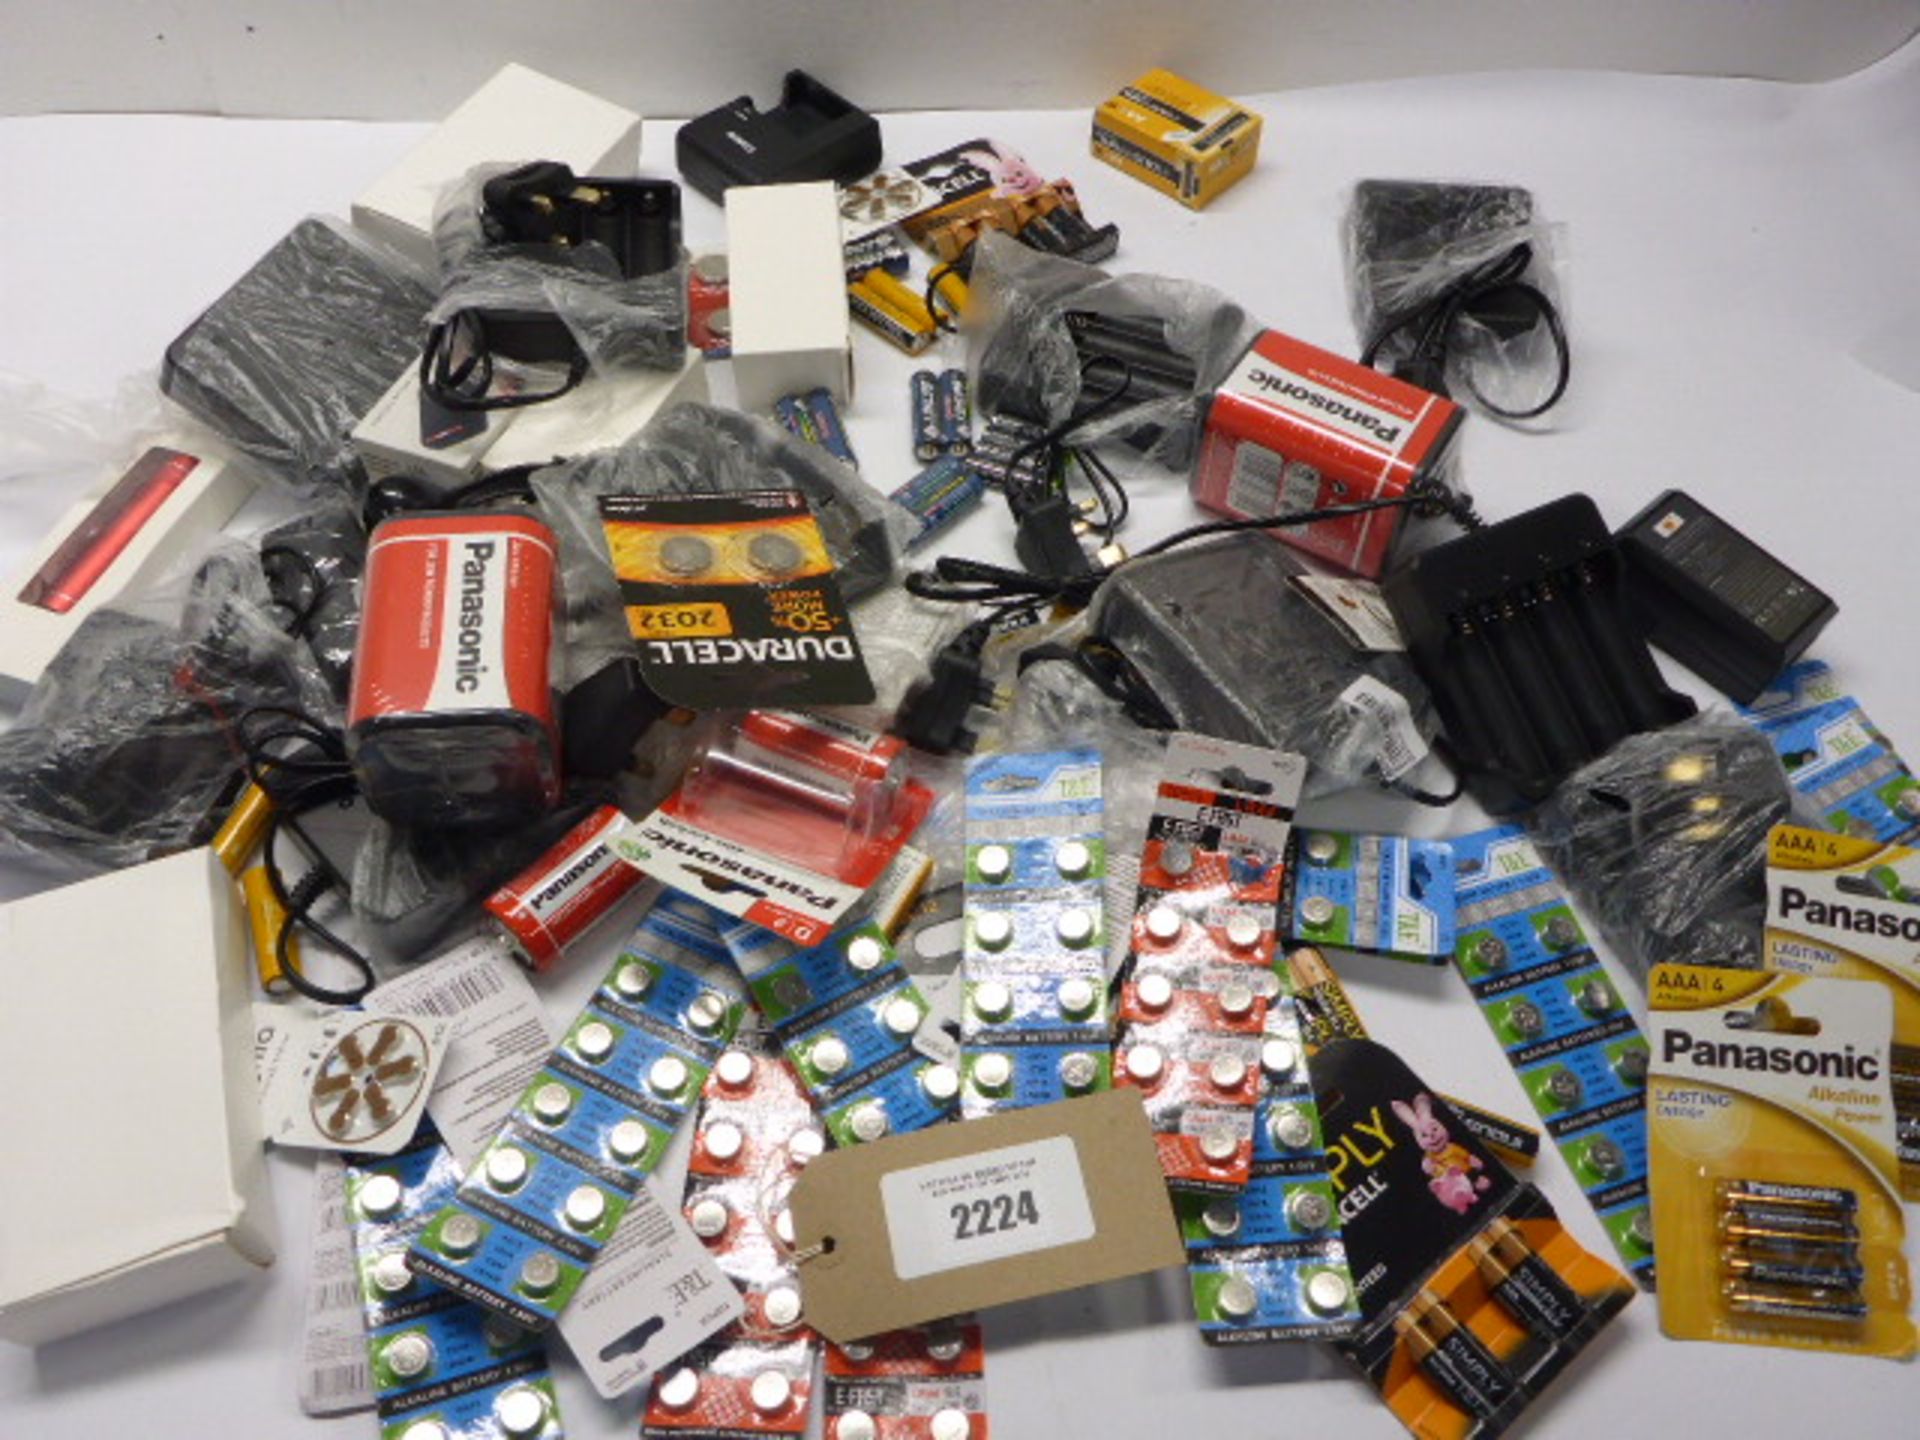 Bag containing quantity of various batteries